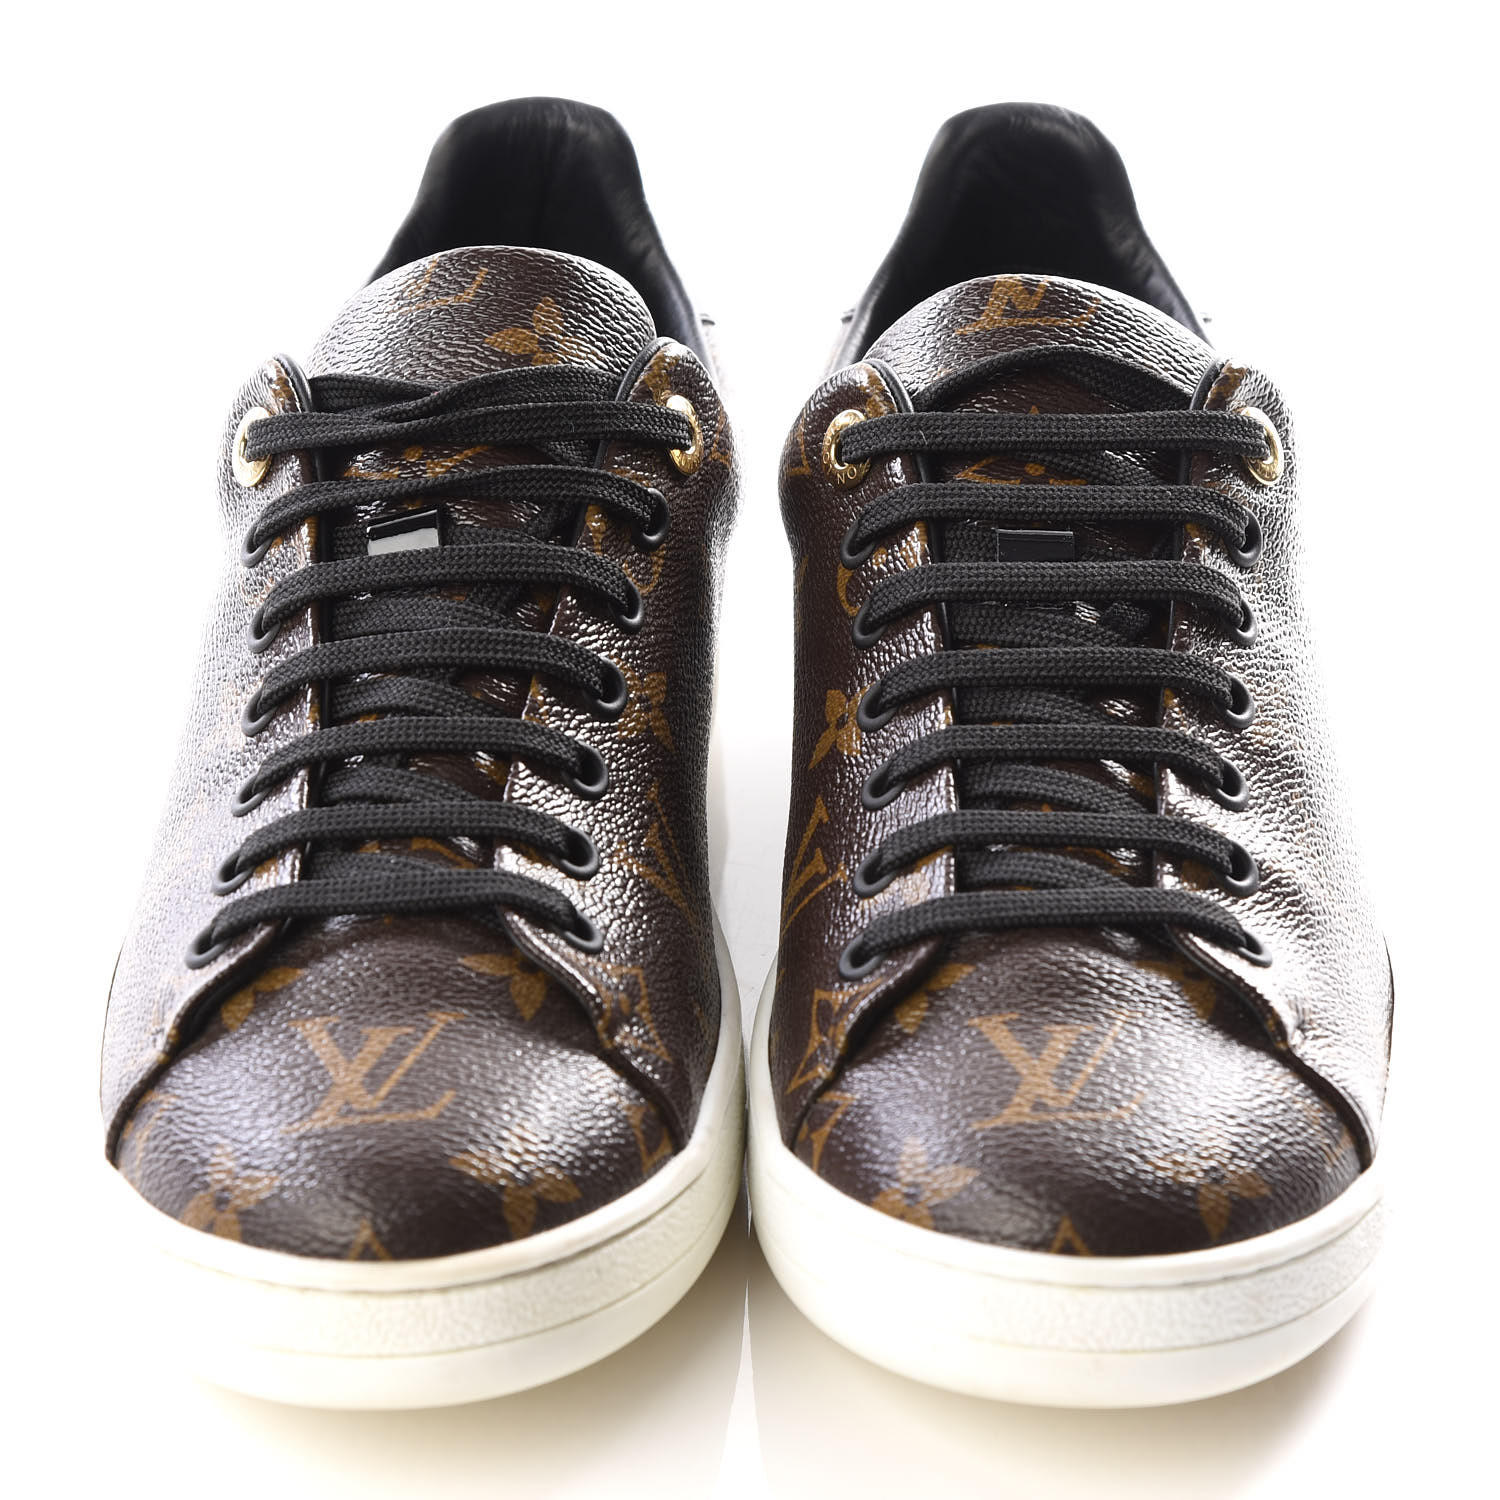 LOUIS VUITTON Patent Monogram Womens Frontrow Sneakers 41 555129